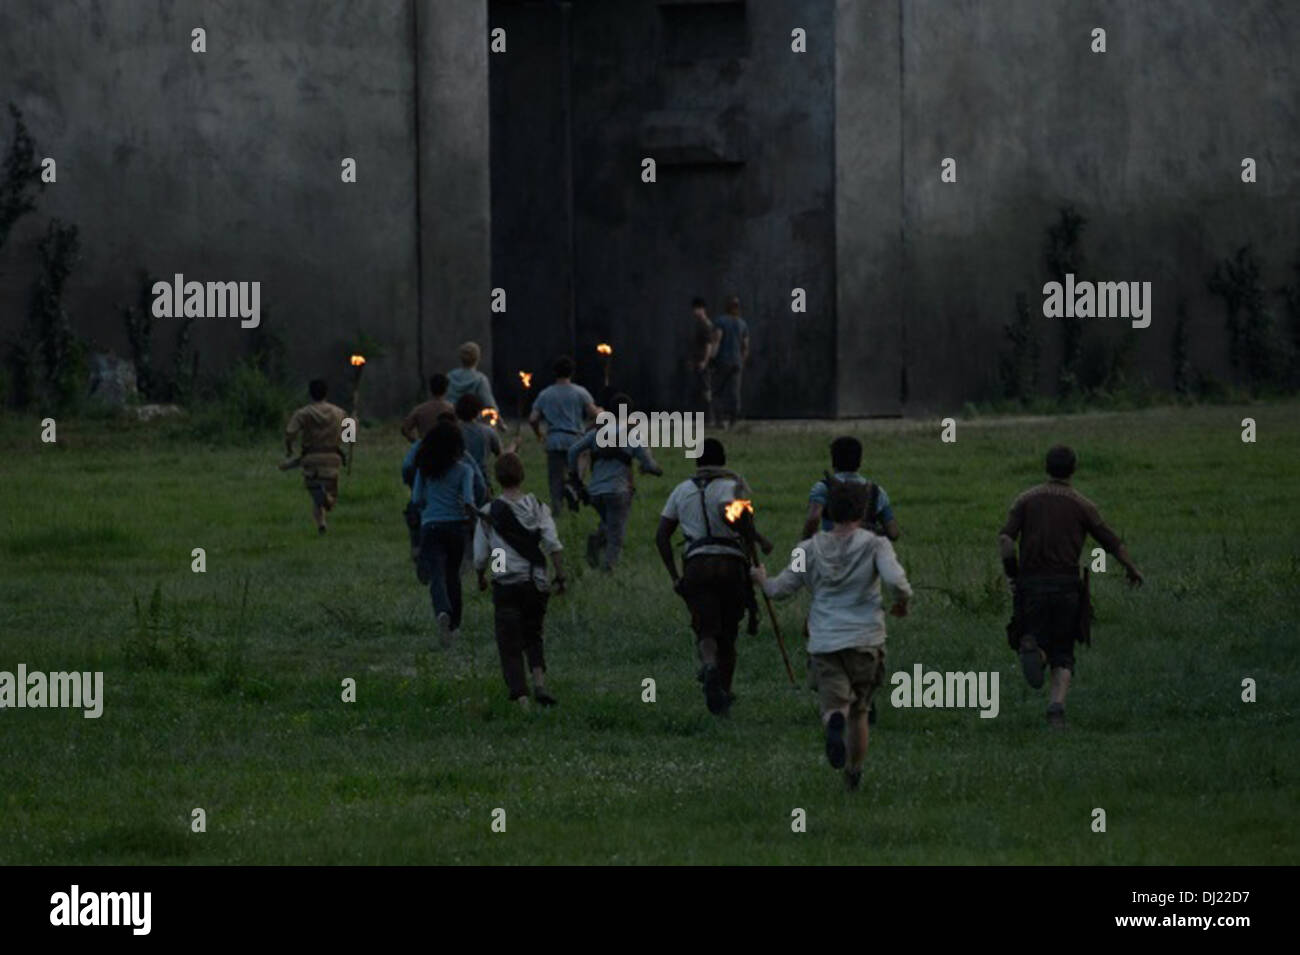 The Maze Runner (2014) directed by Wes Ball • Reviews, film + cast •  Letterboxd